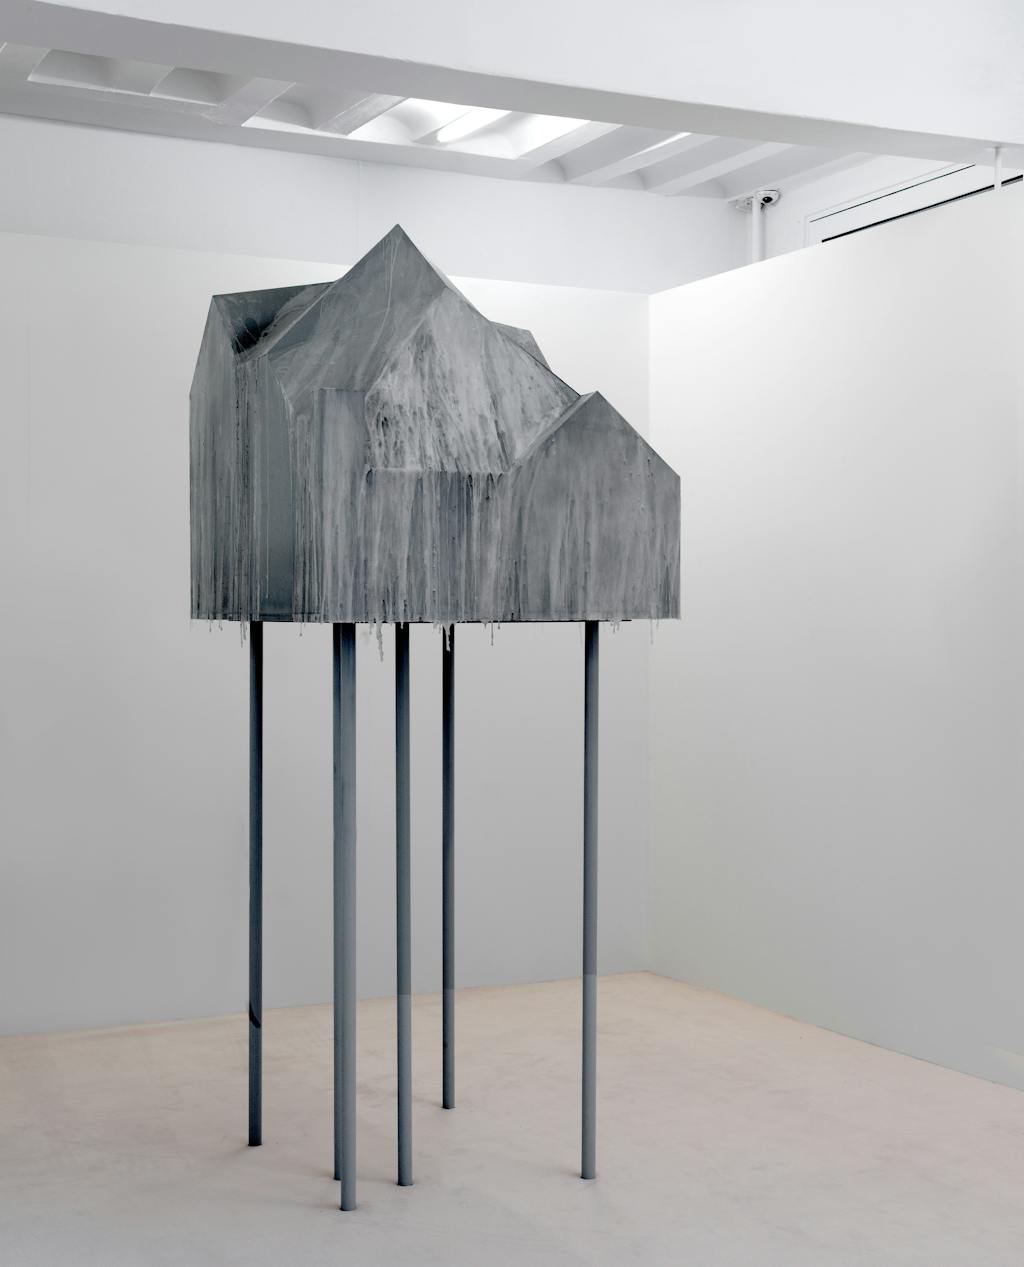 <p style="font-size:10px">Charbel-joseph H. Boutros, The Booth, The Gallerist and The Mausoleum, 2021, Photo, video, ipad, printed contact, frame, dimensions variable</p> - © Image courtesy of the artist and Grey Noise, Dubai., Paris Internationale